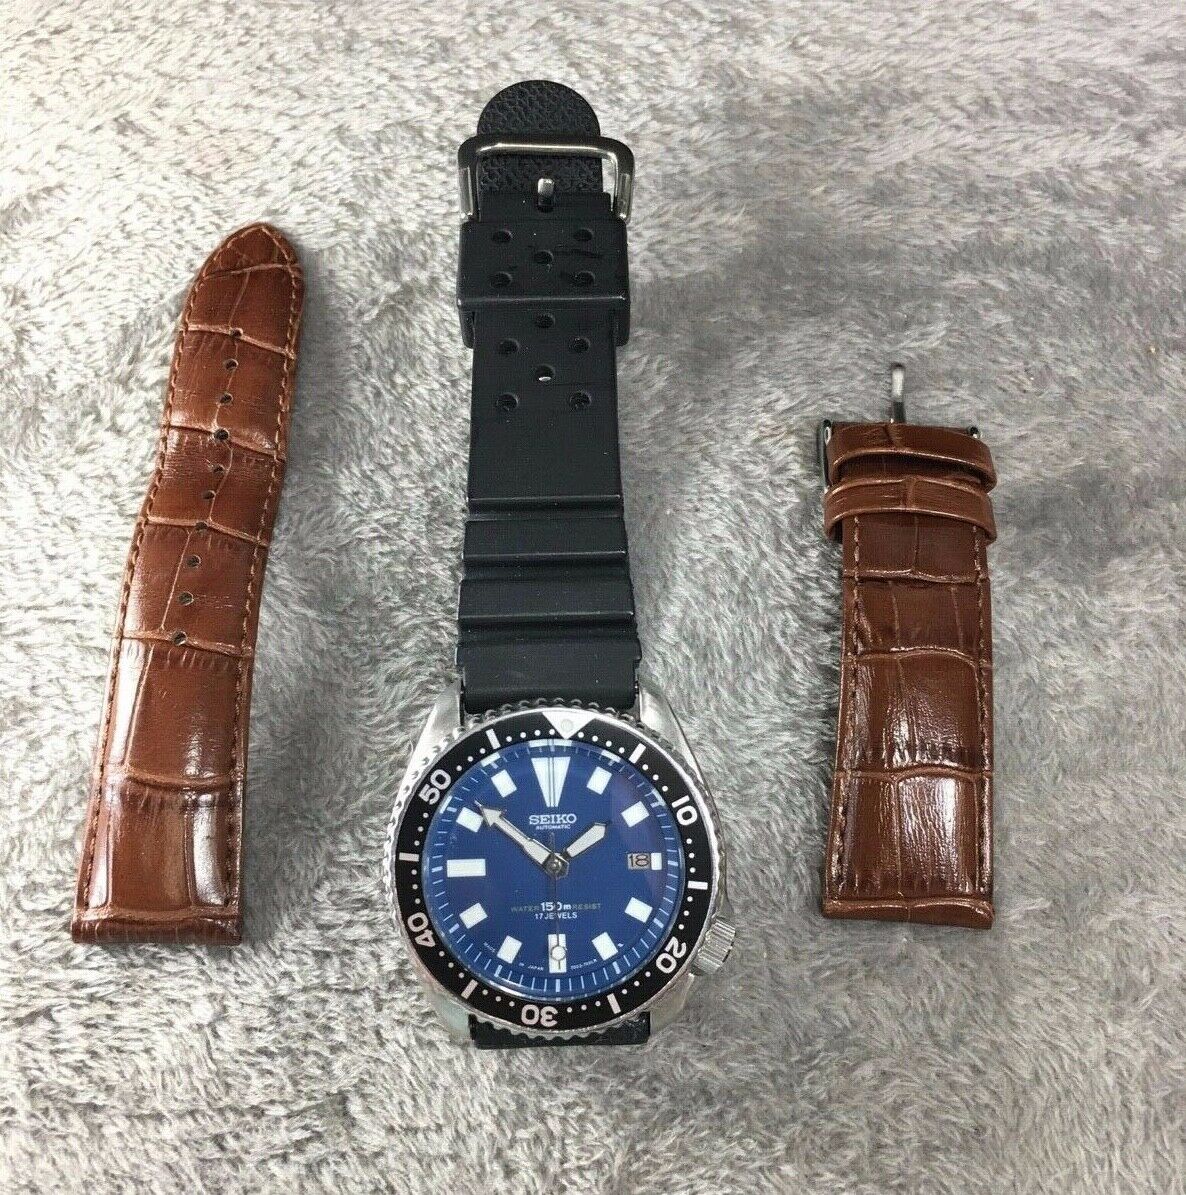 SEIKO AUTOMATIC DIVER WATCH BLUE 175 MODEL 7002-700LR WITH EXTRA BAND |  WatchCharts